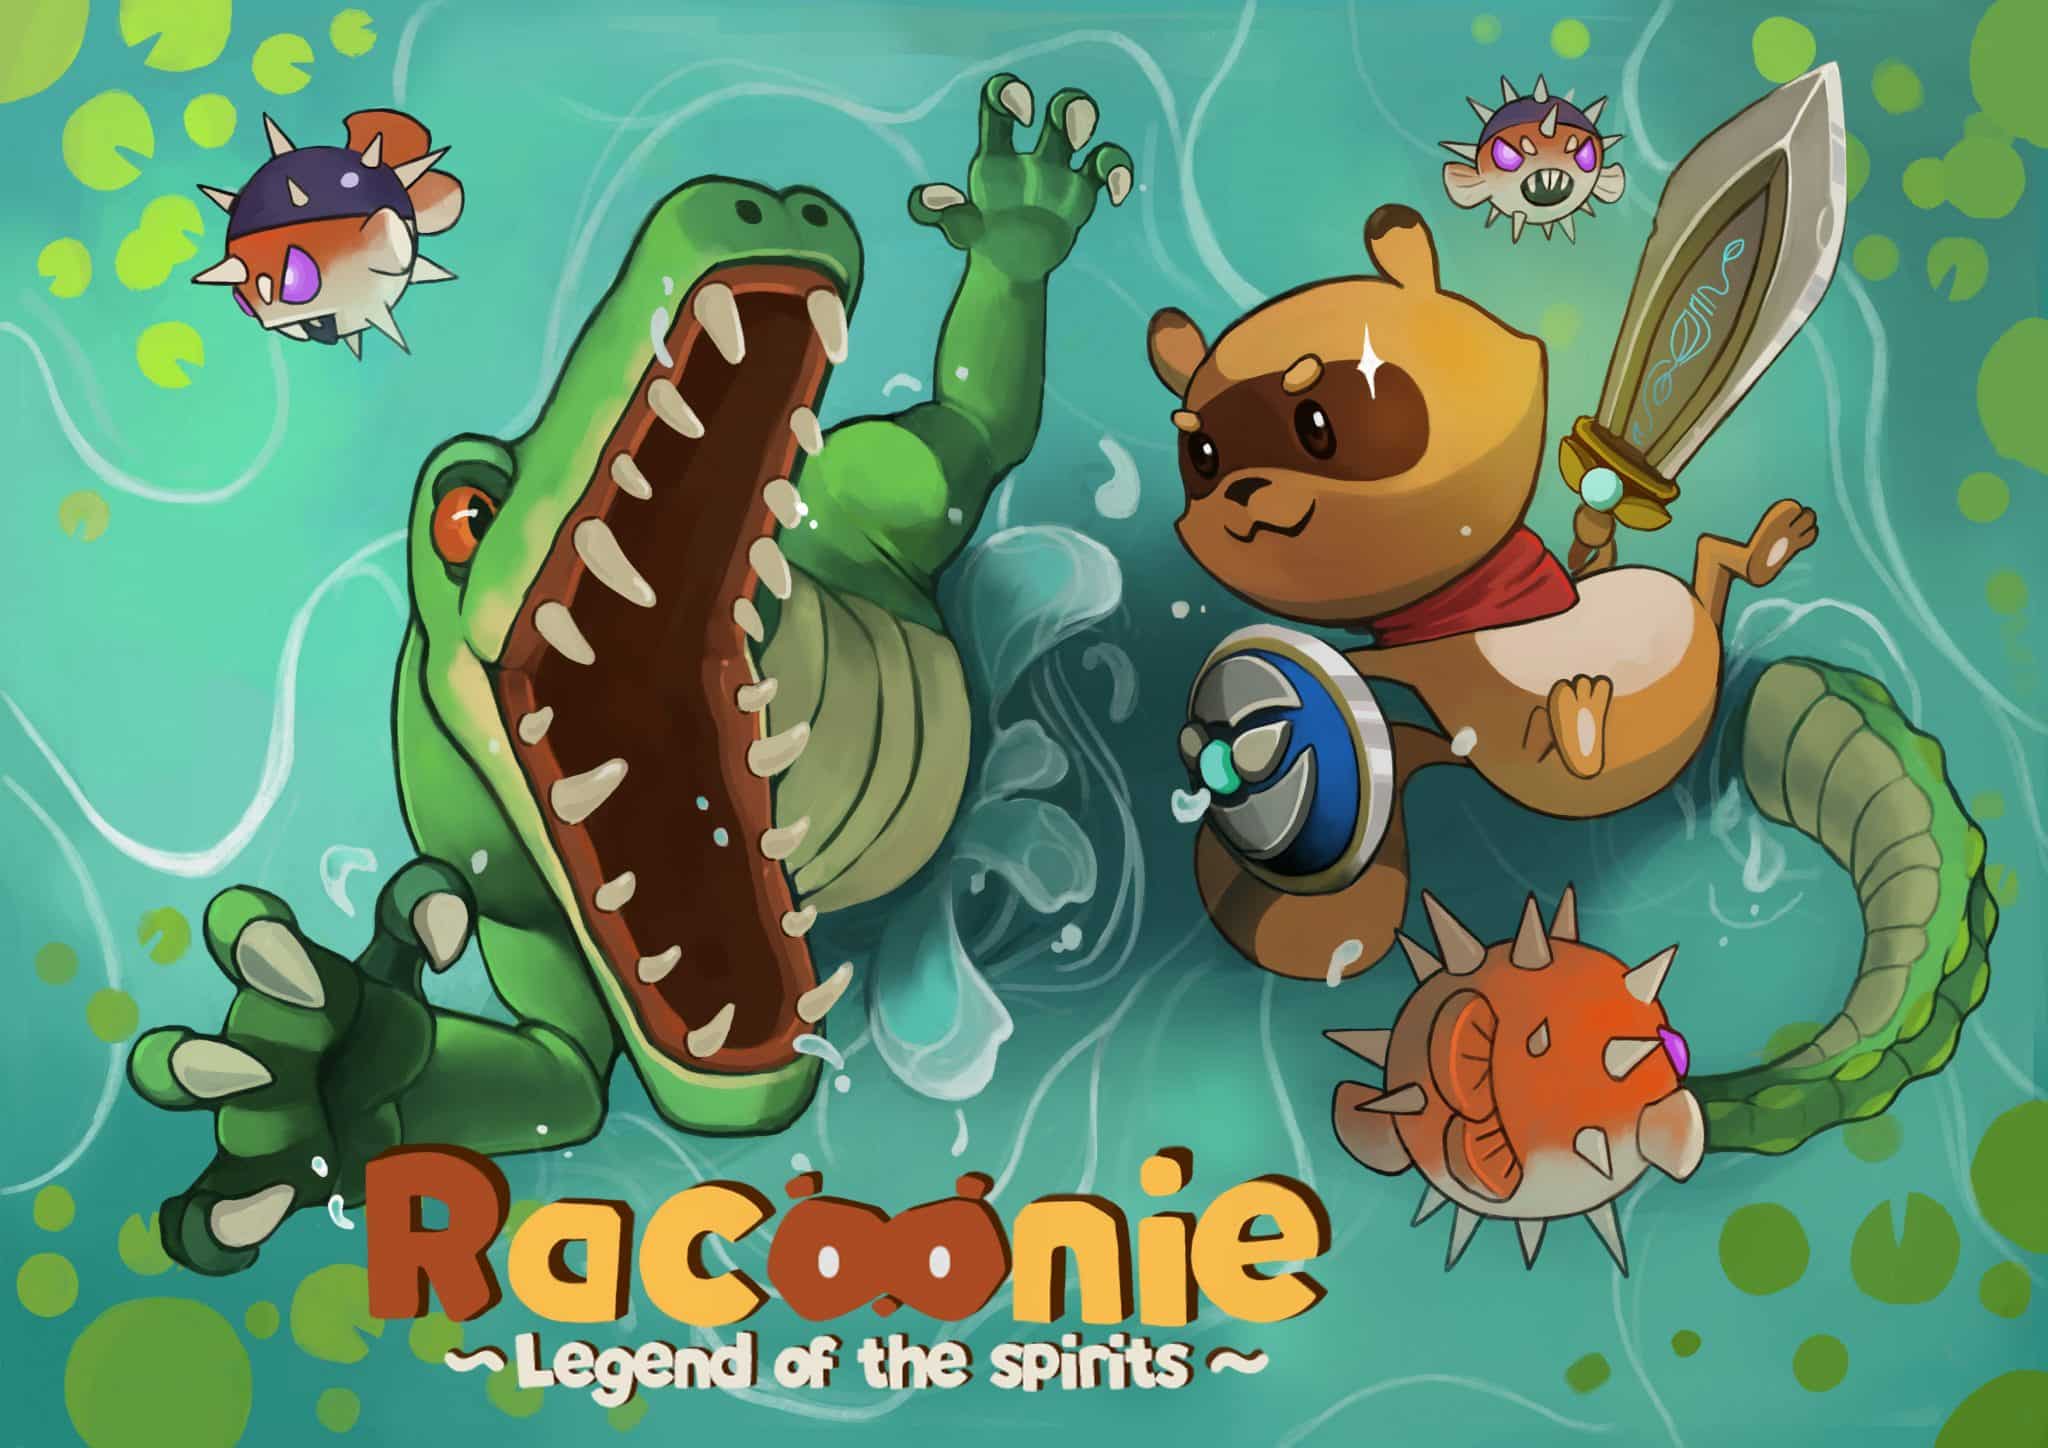 Racoonie - Legend of the spirits